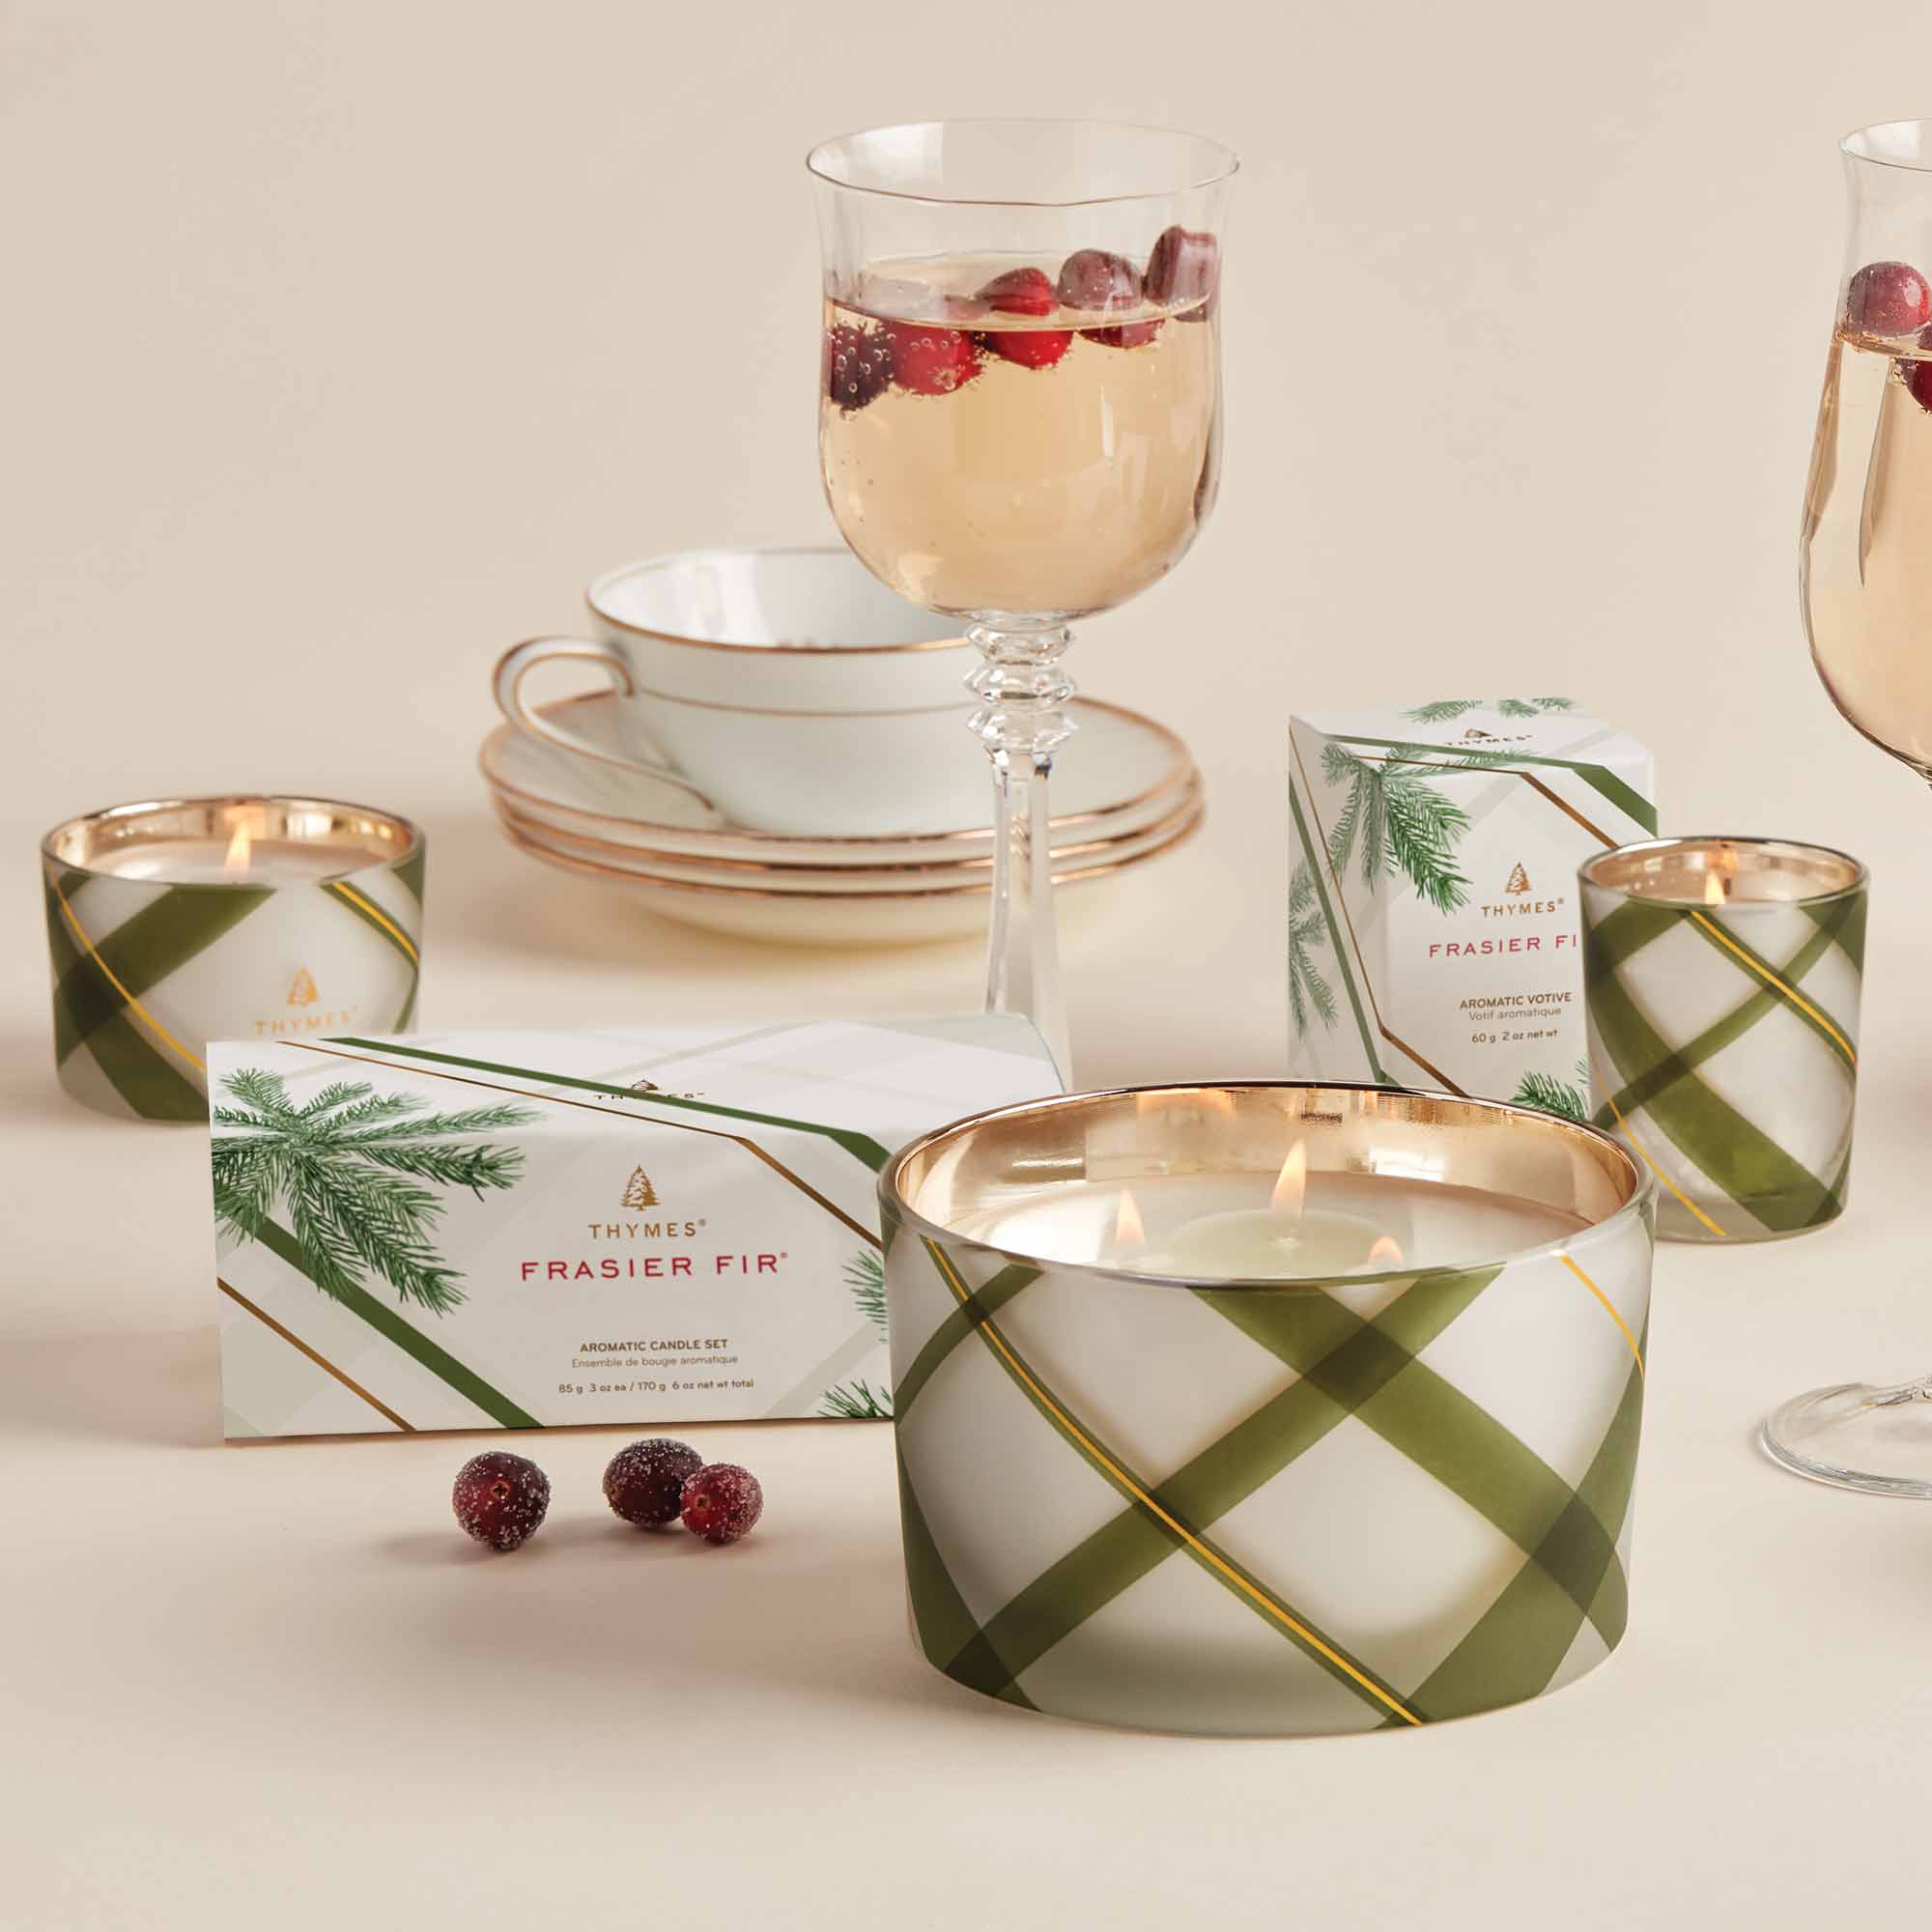 Thymes Frasier Fir Candle - Gifted